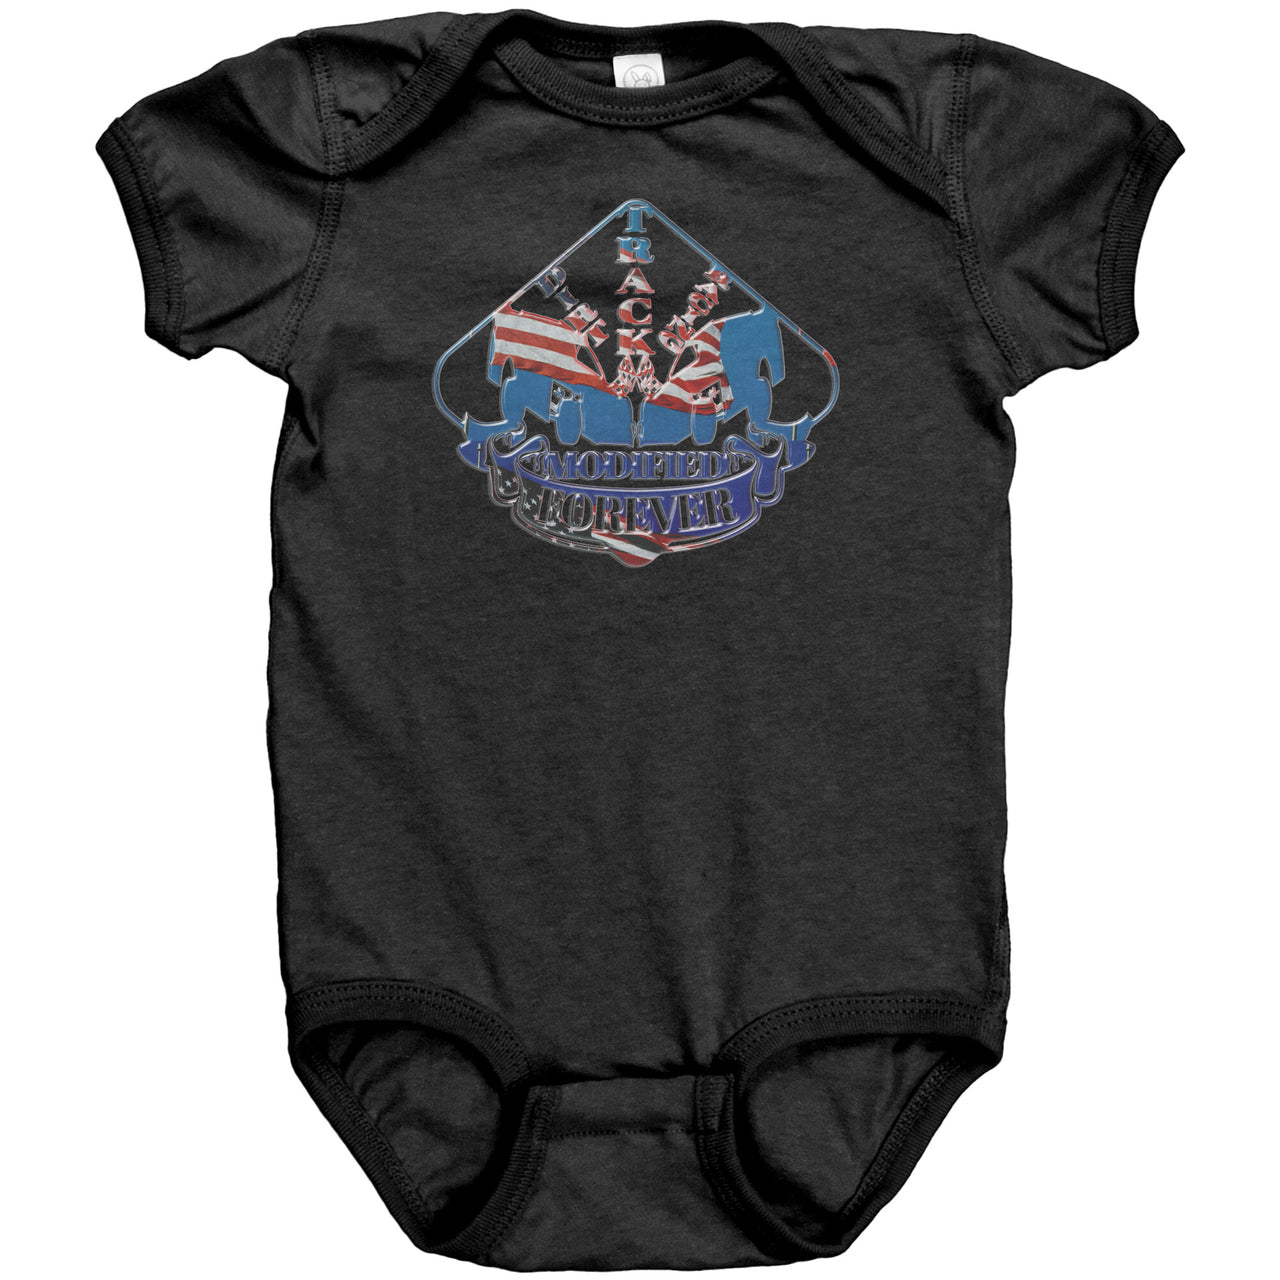 USA Dirt Modified Forever Baby T-Shirts